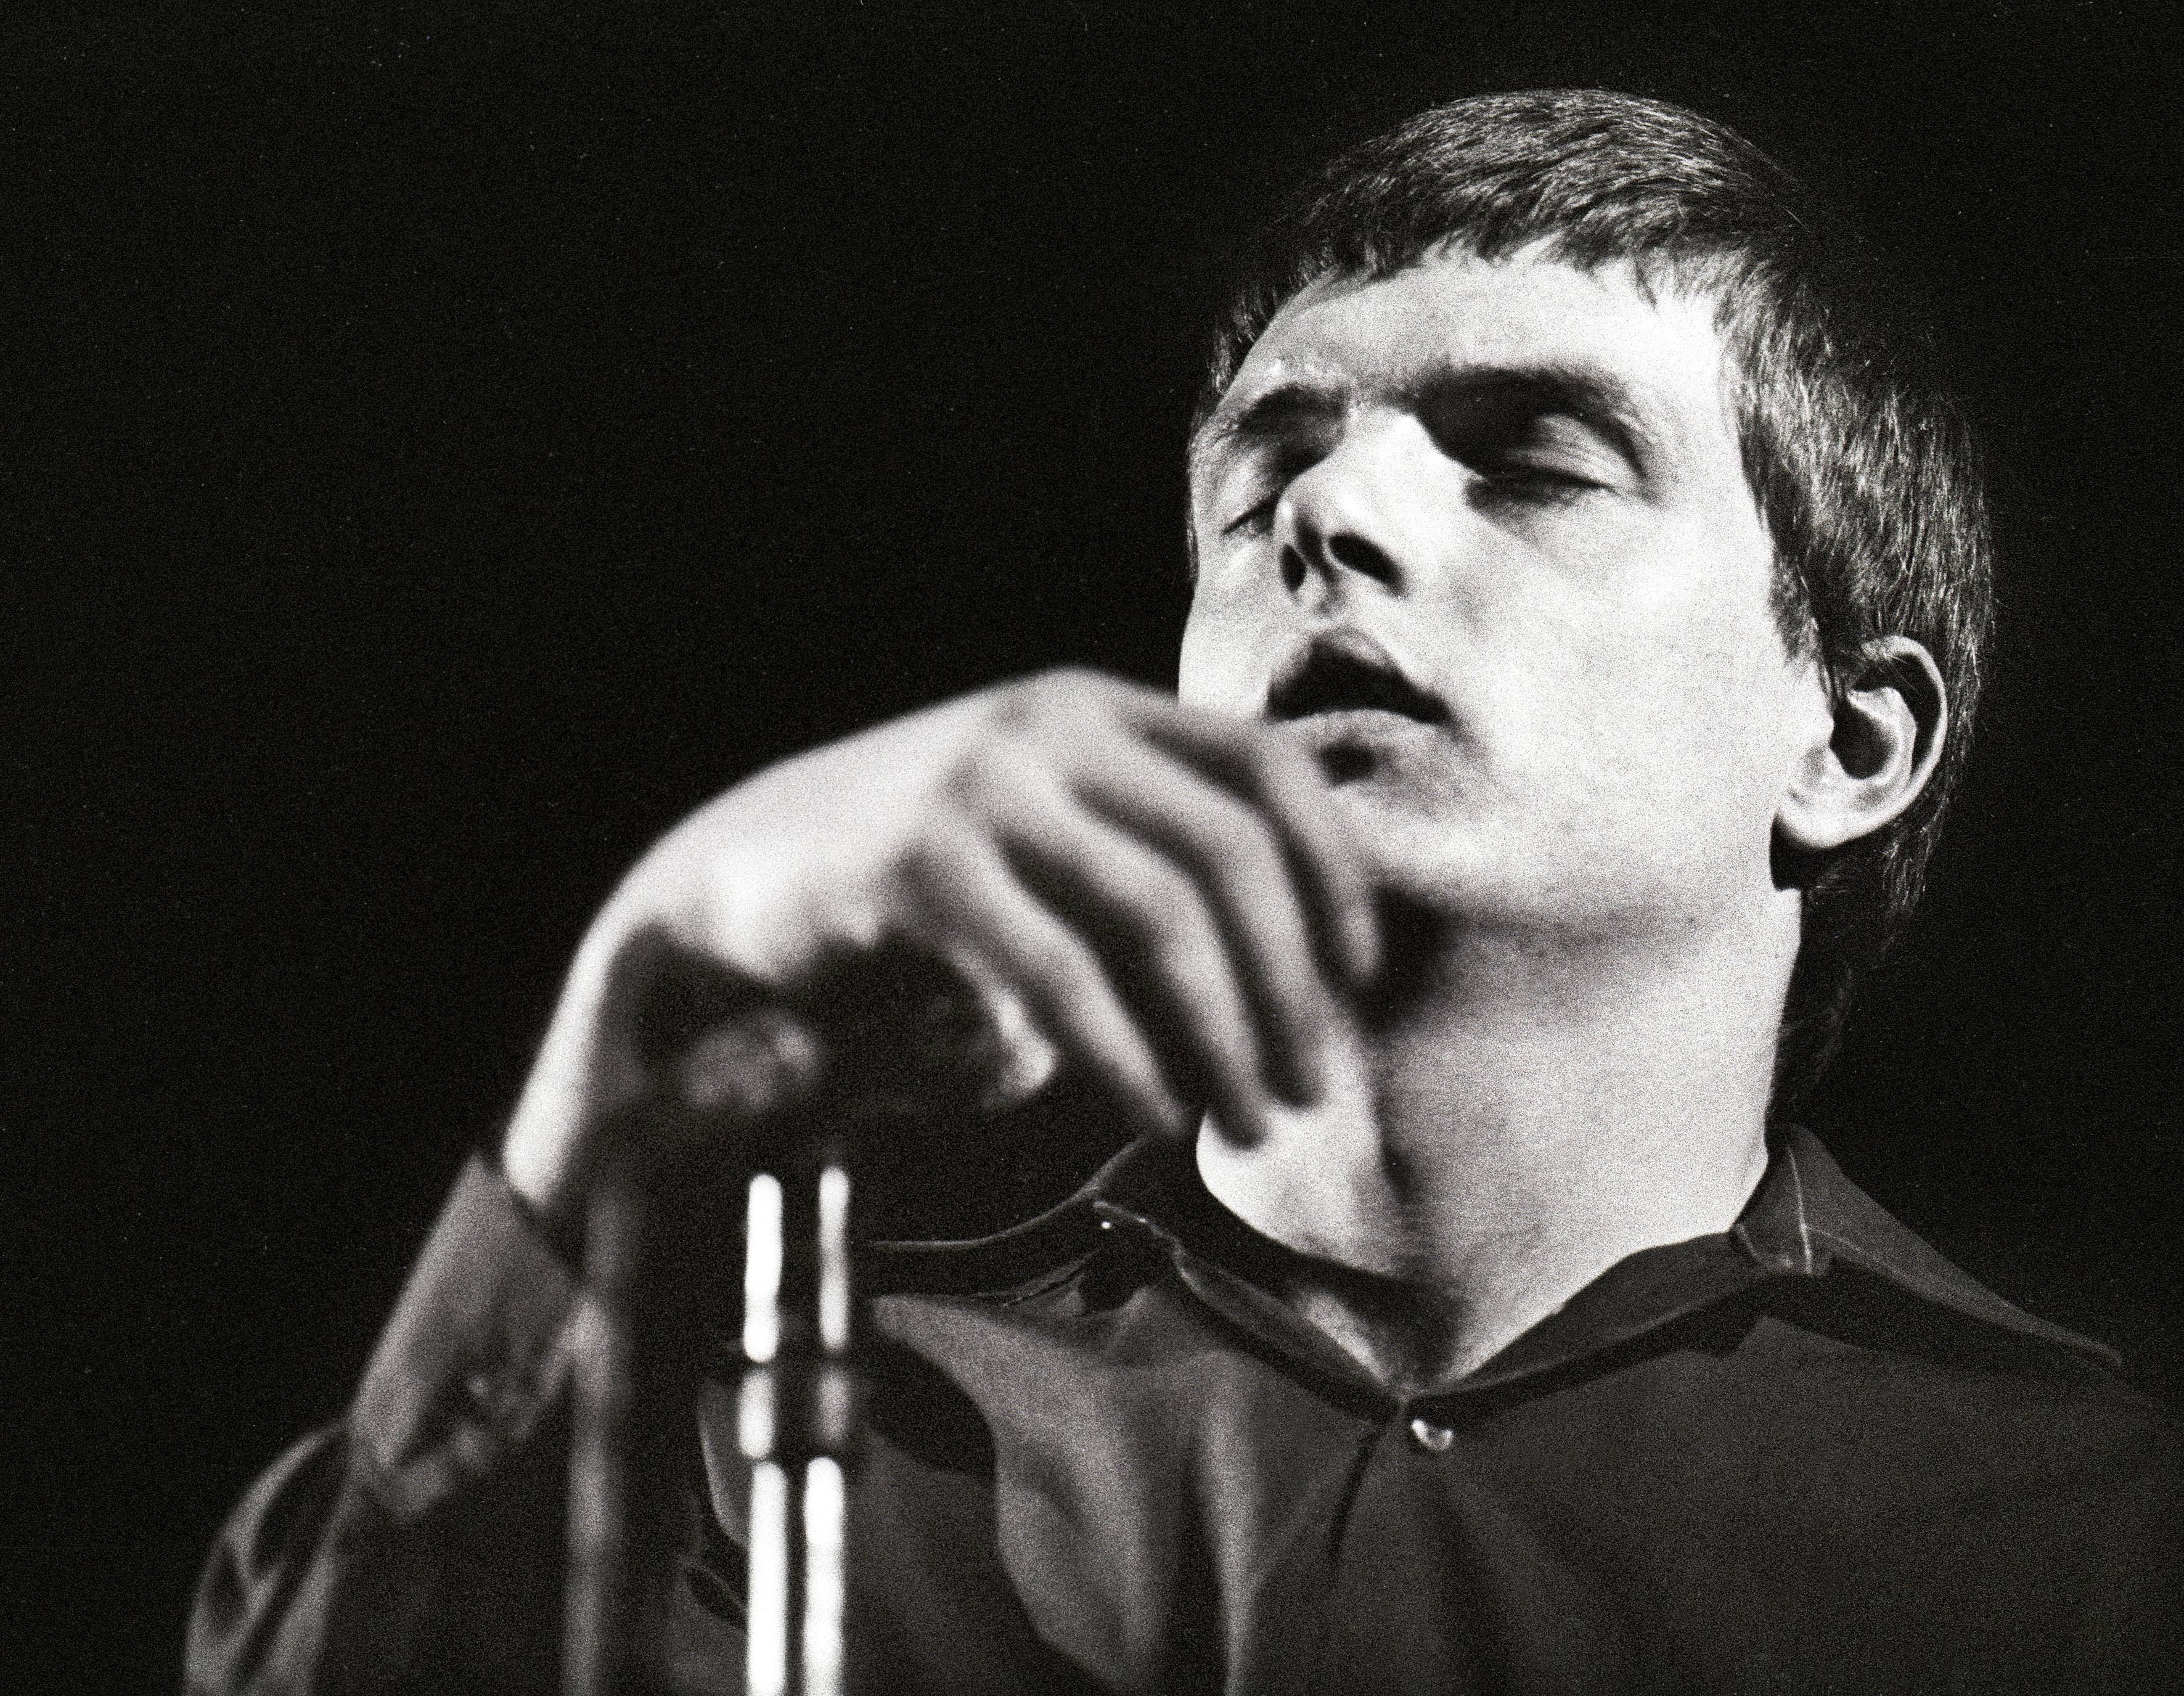 taille-ian-curtis-Image